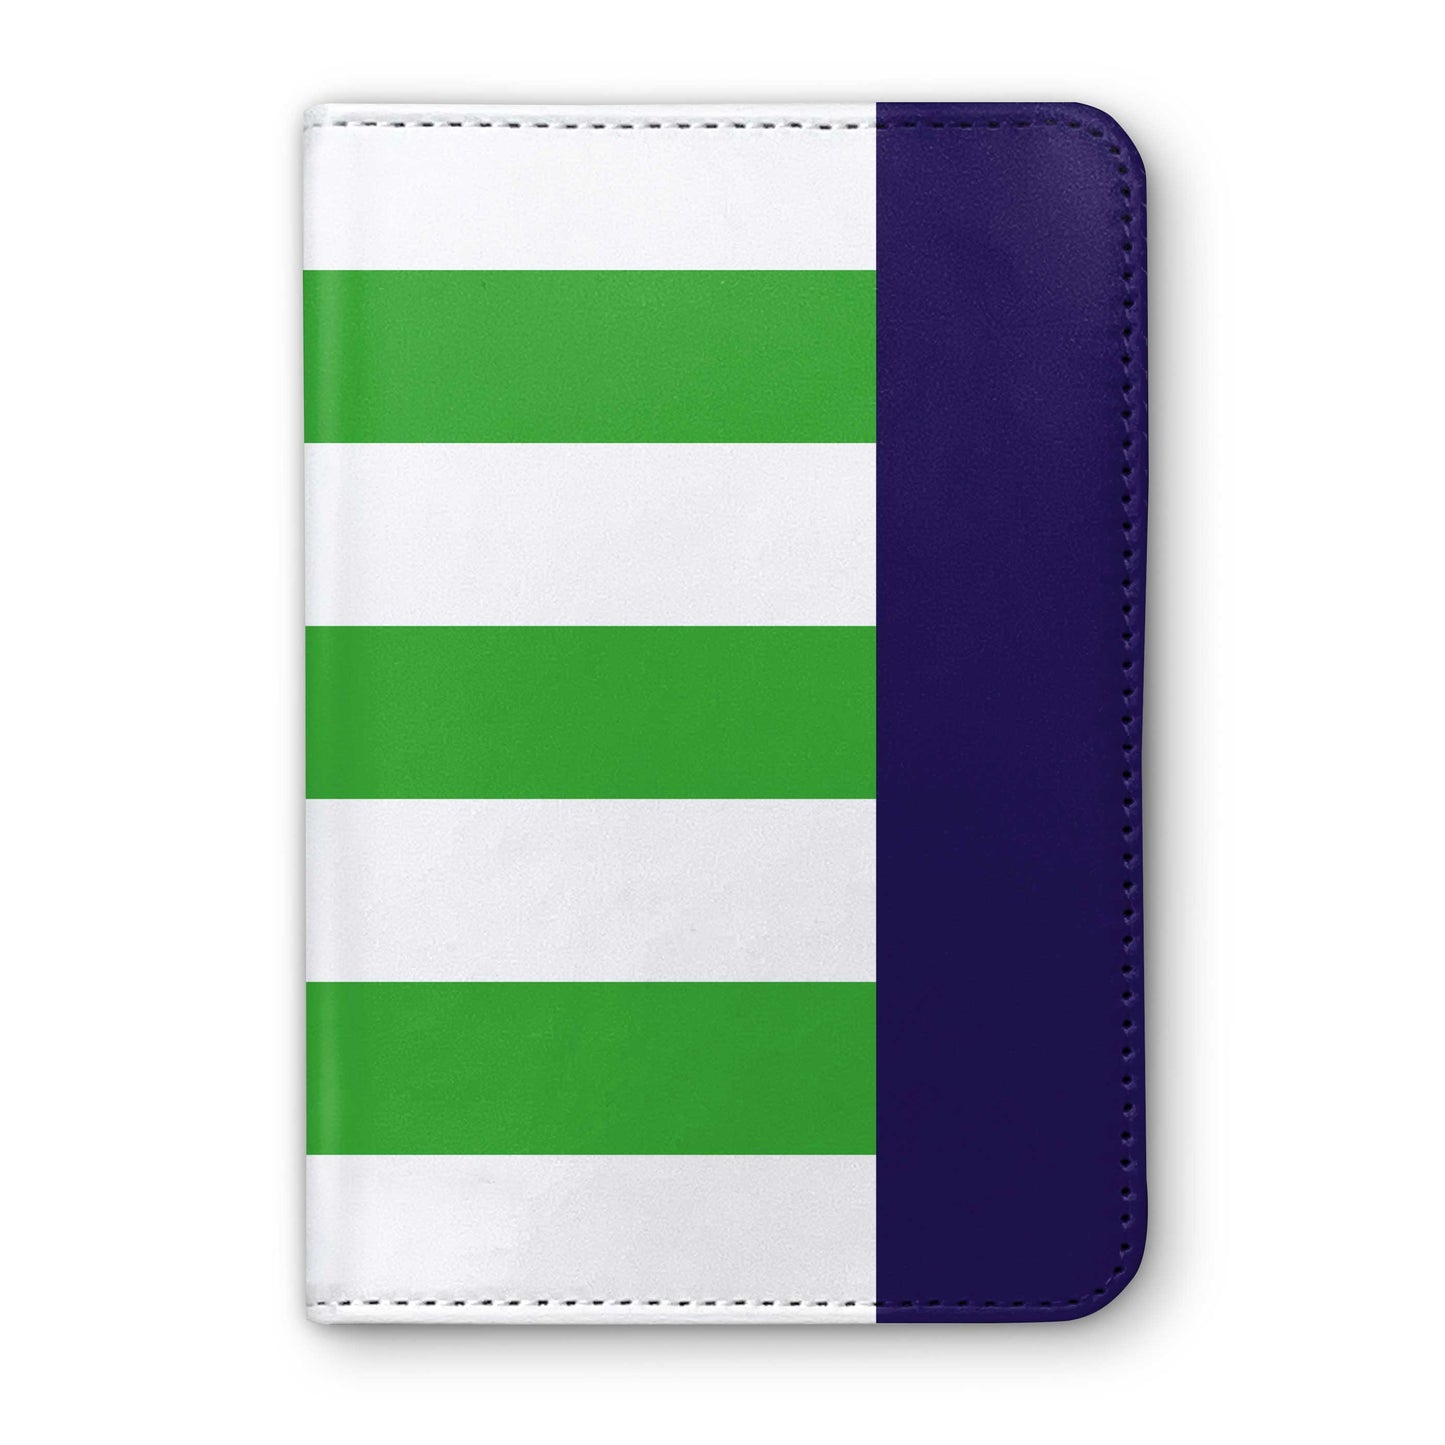 Mick and Janice Mariscotti Horse Racing Passport Holder - Hacked Up Horse Racing Gifts